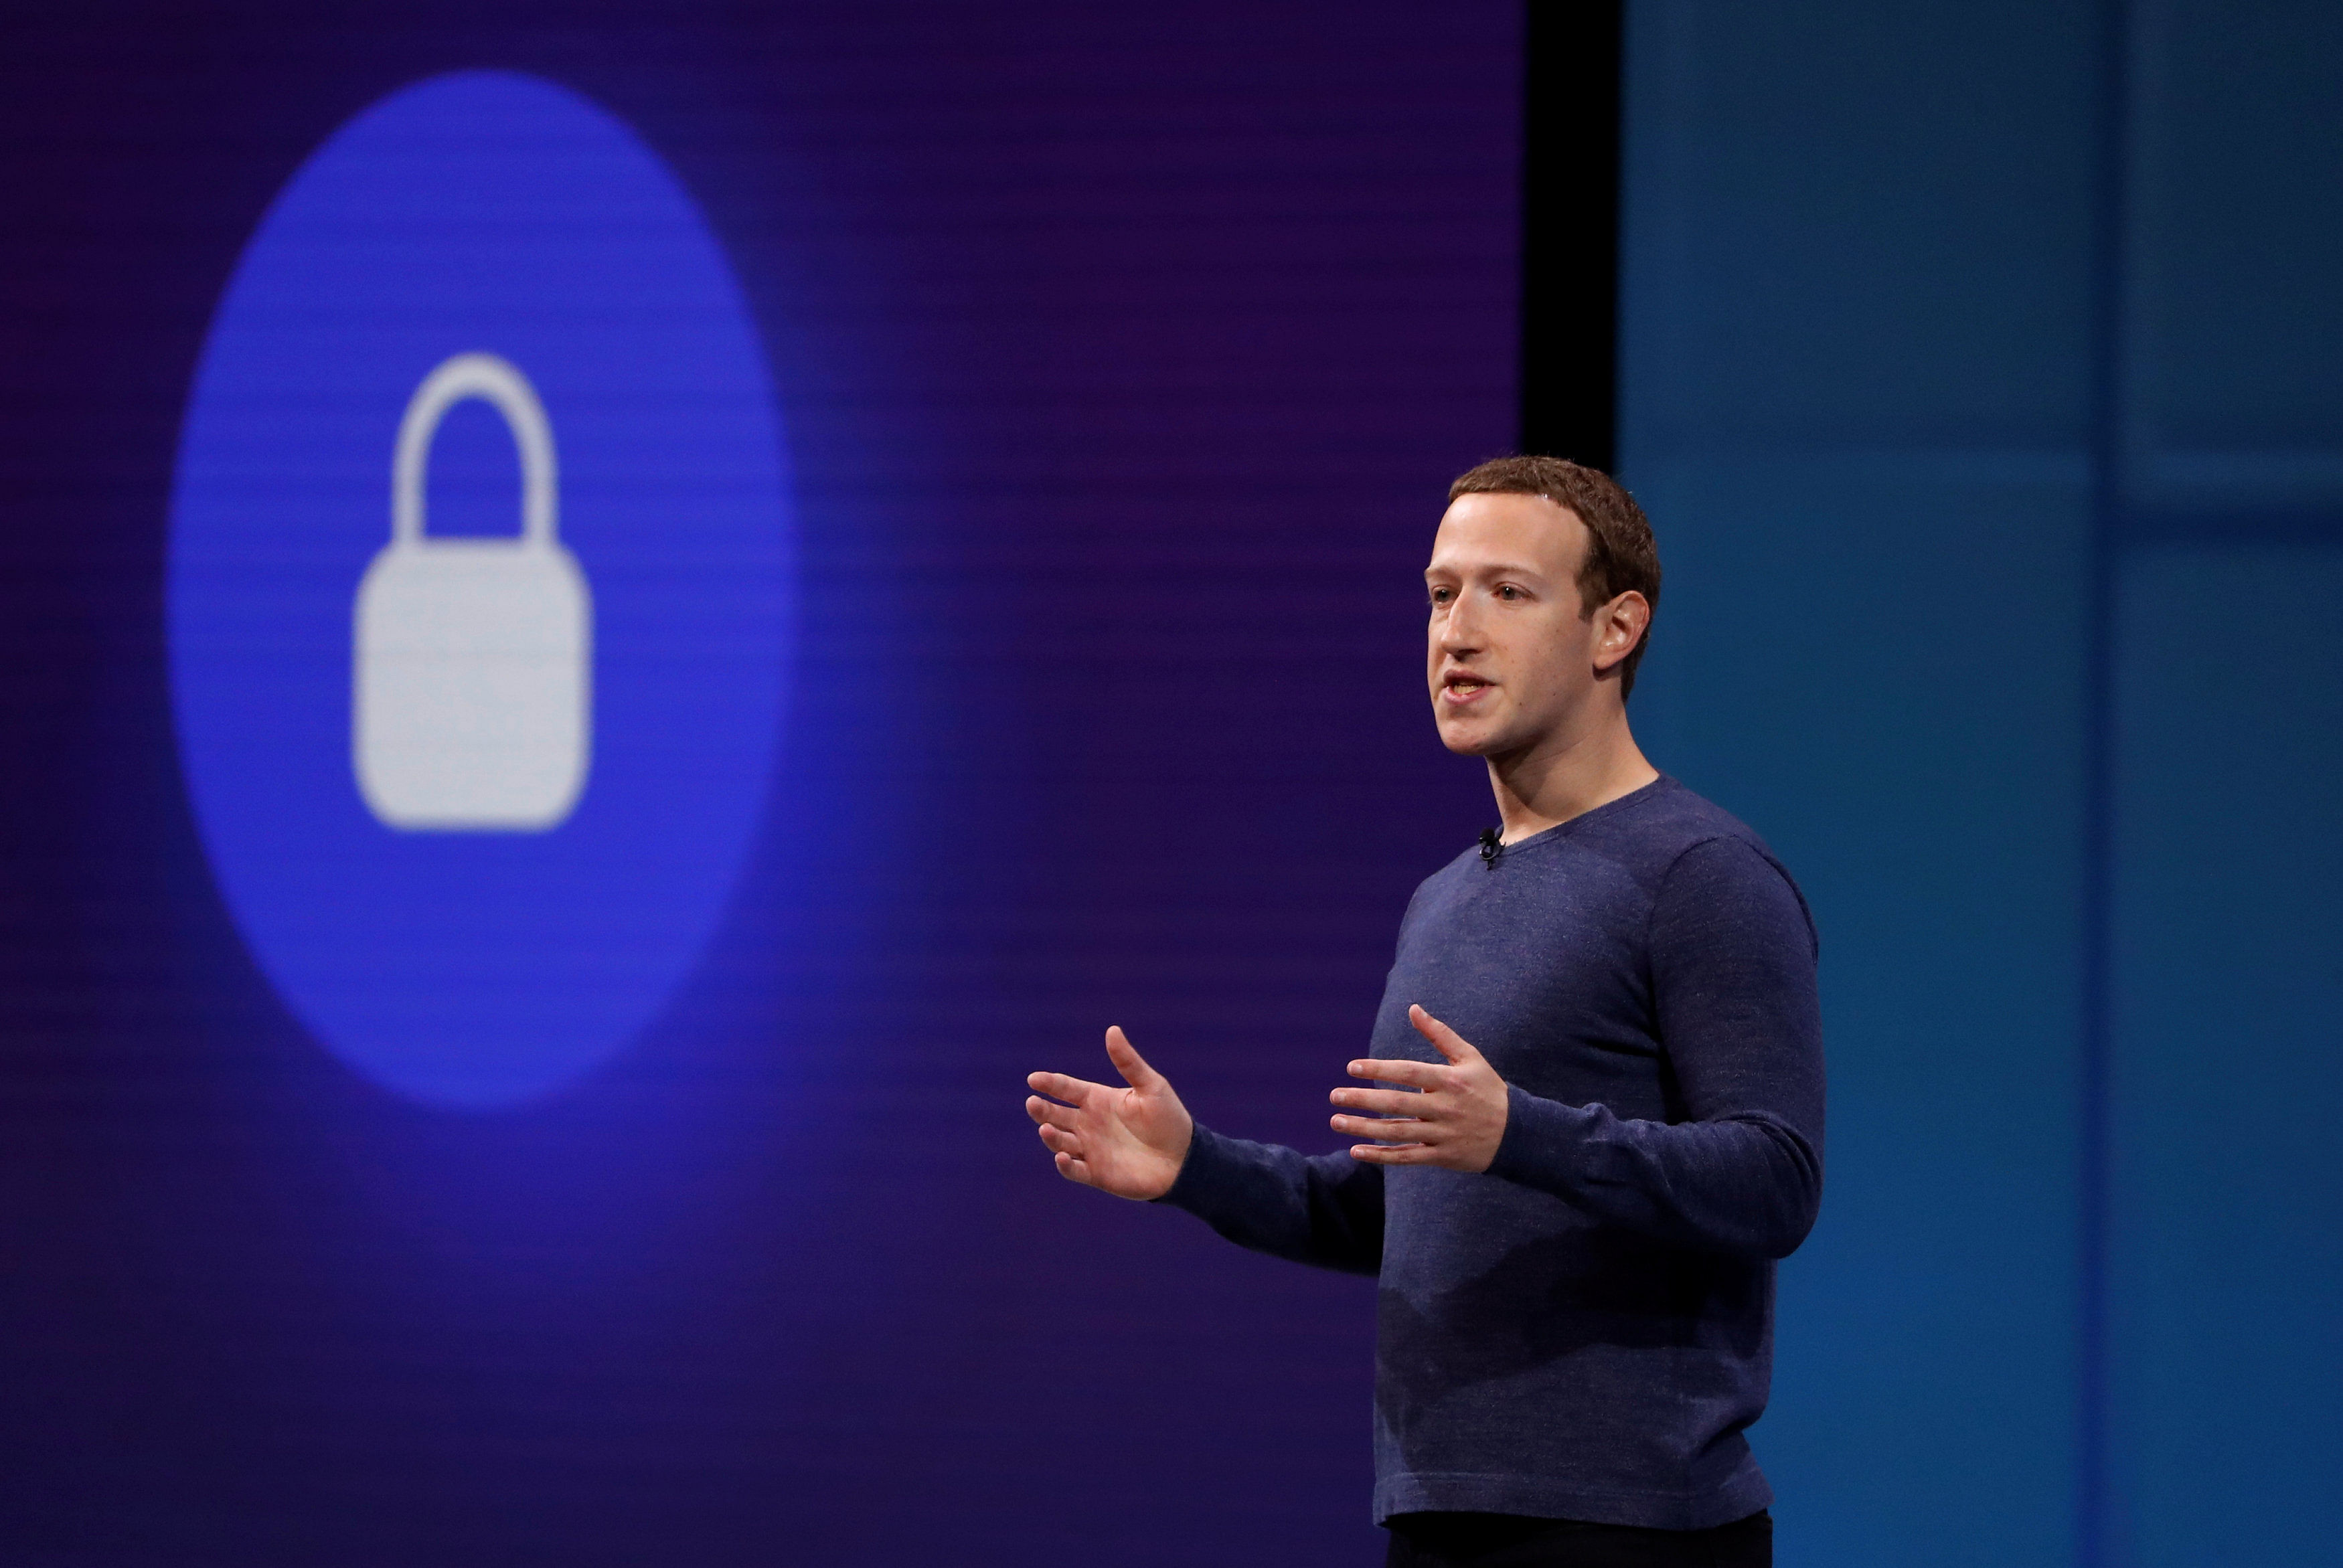 The Facebook CEO repeated that he would not change policy based on "a threat" to revenue but based on "the right things" for the Facebook community. Credit: Reuters Photo